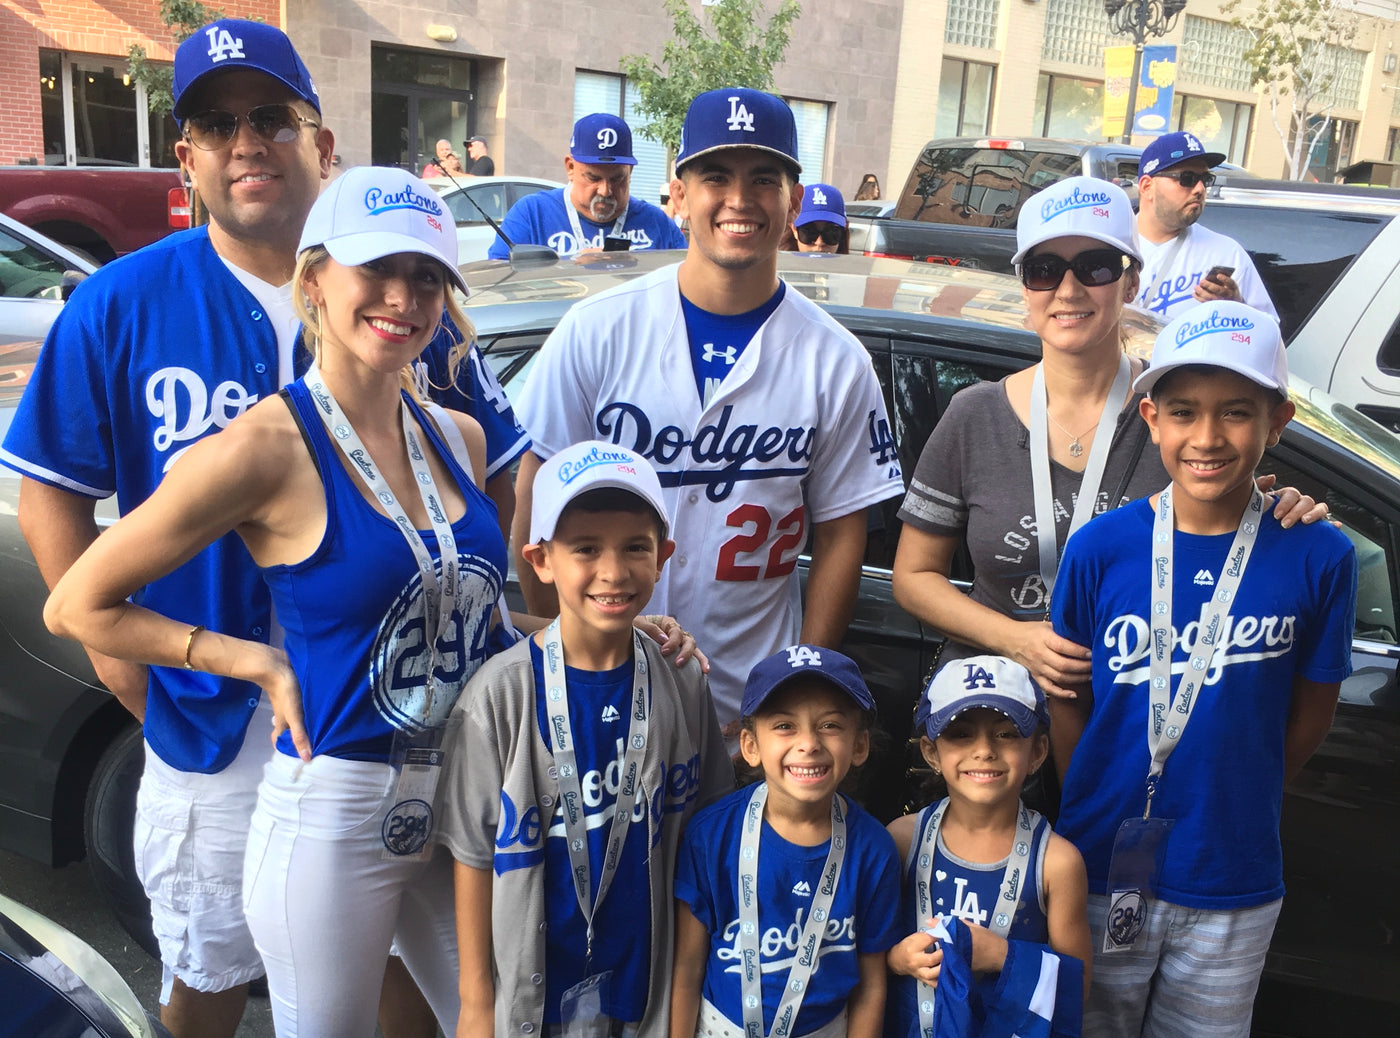 Pin by Mardie Velazquez on Dodgers outfit  Dodgers outfit, Sports attire, Baseball  outfit